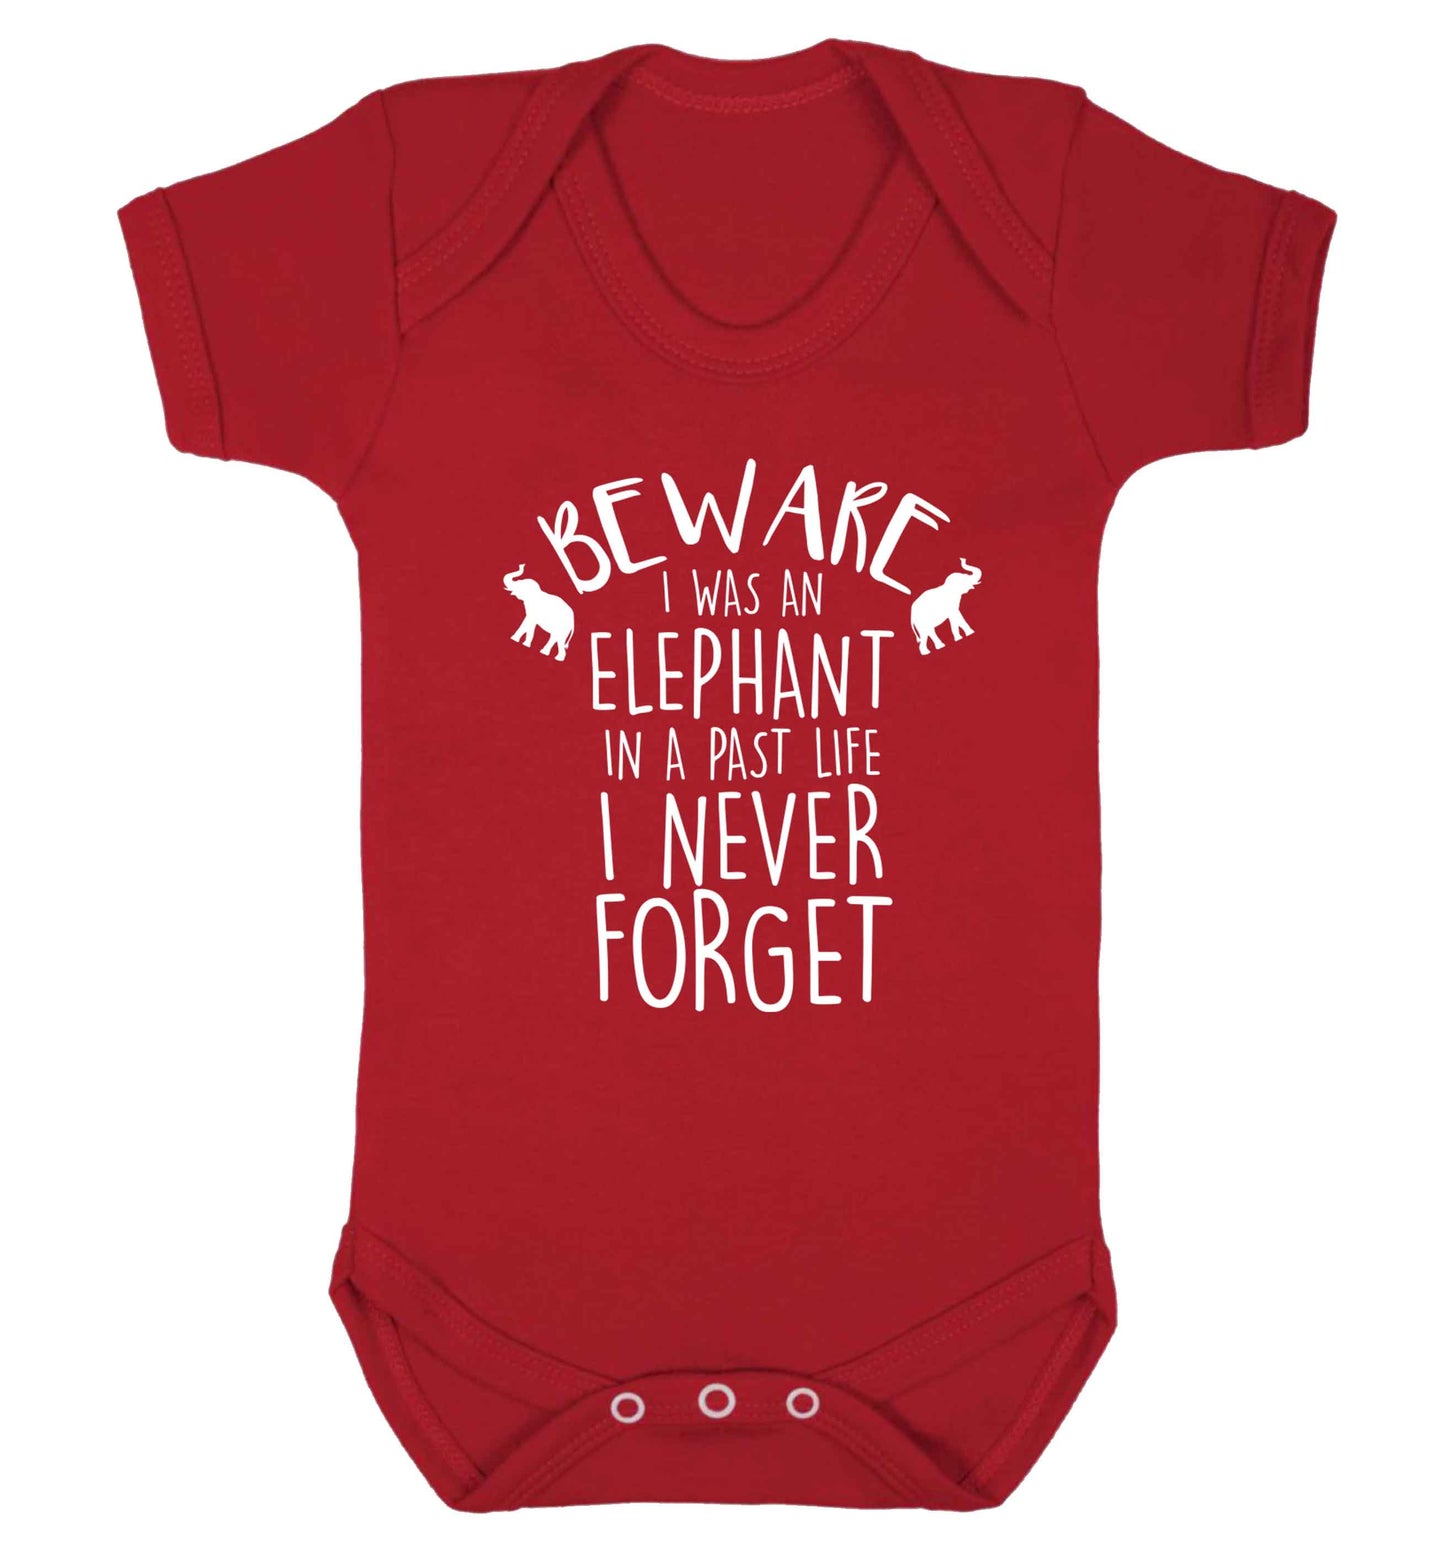 Beware I was an elephant in my past life I never forget Baby Vest red 18-24 months